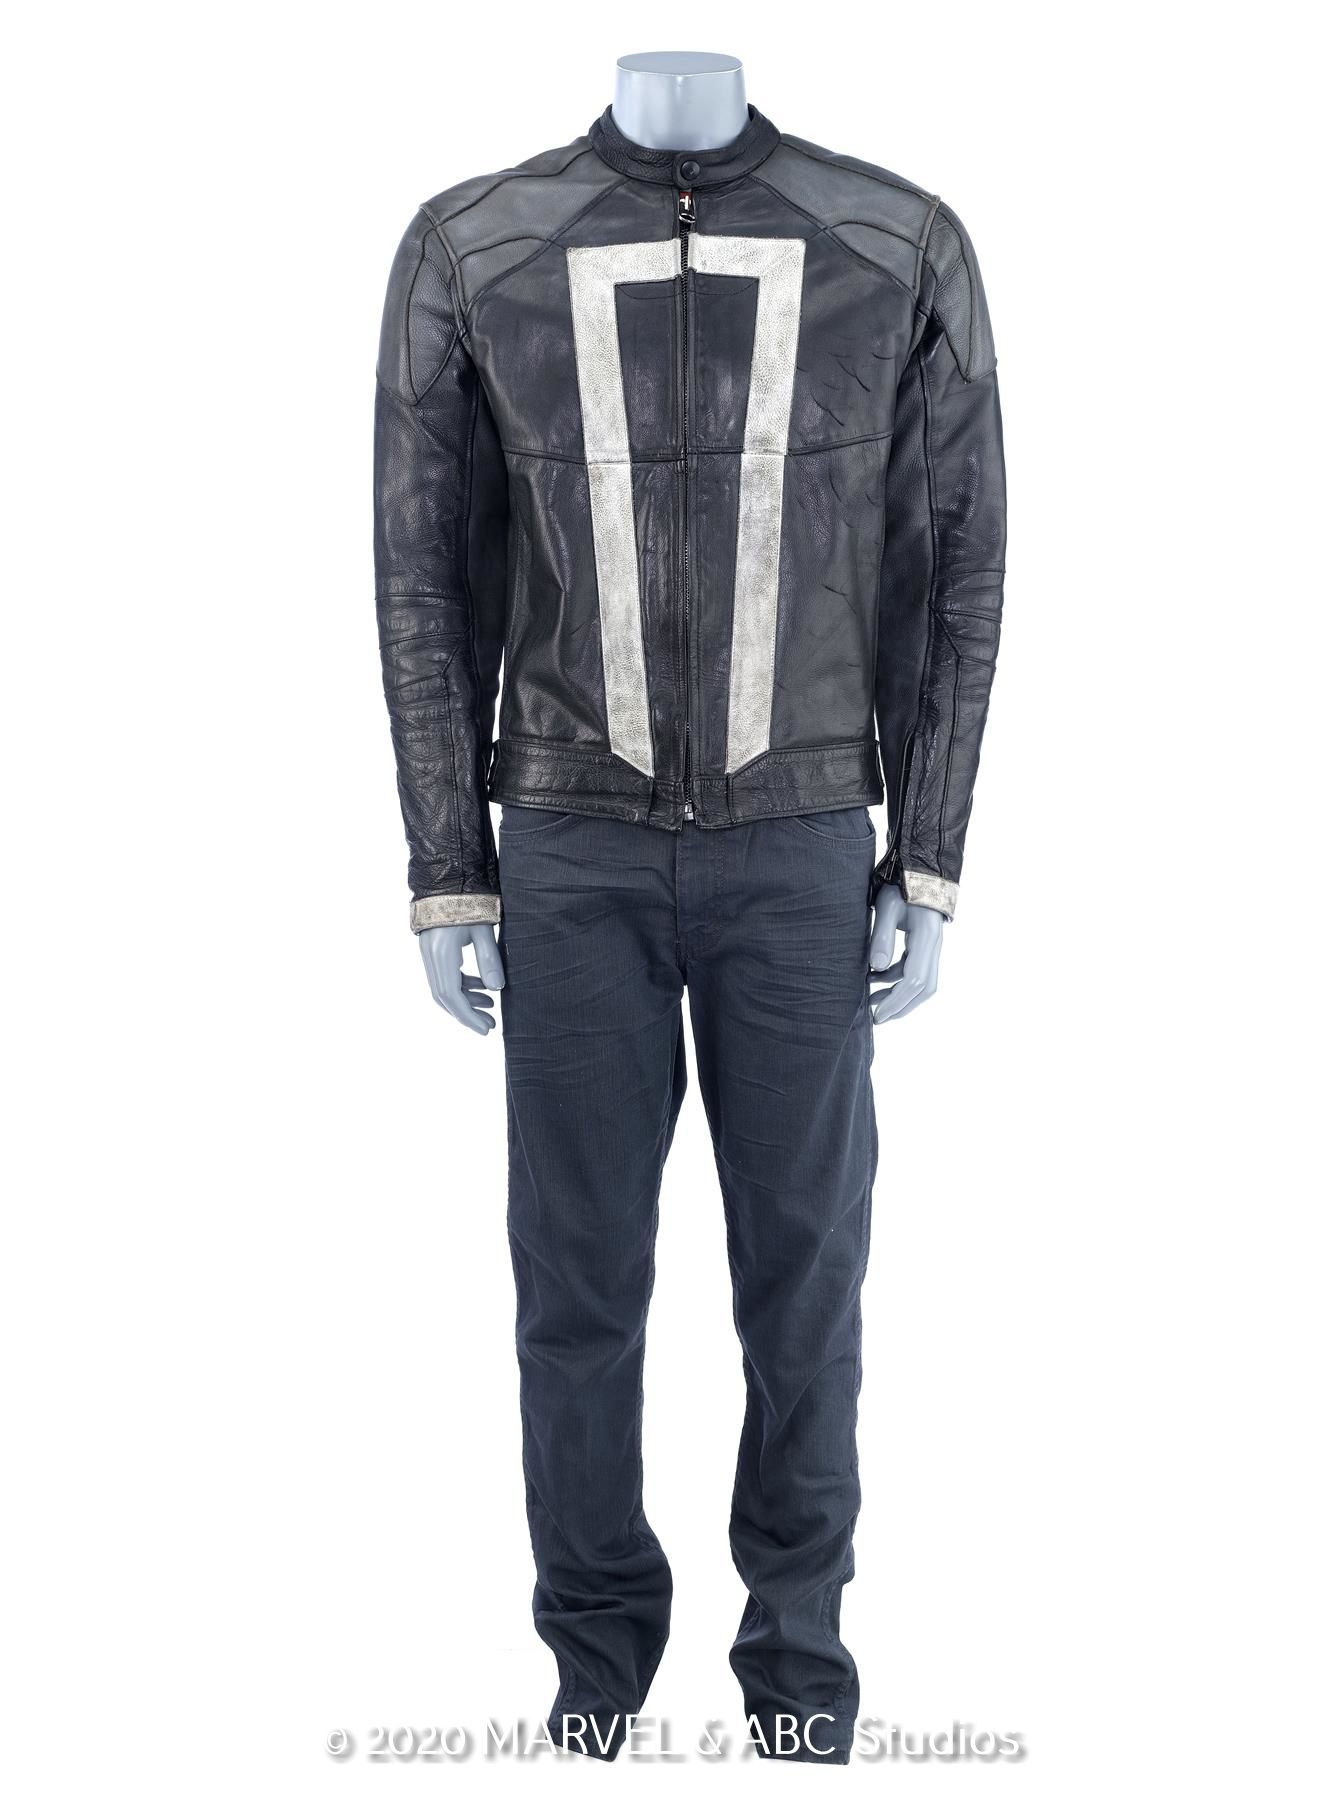 Agents of S.H.I.E.L.D. - 127637_Robbie Reyes' Ghost Rider Costume 02_1